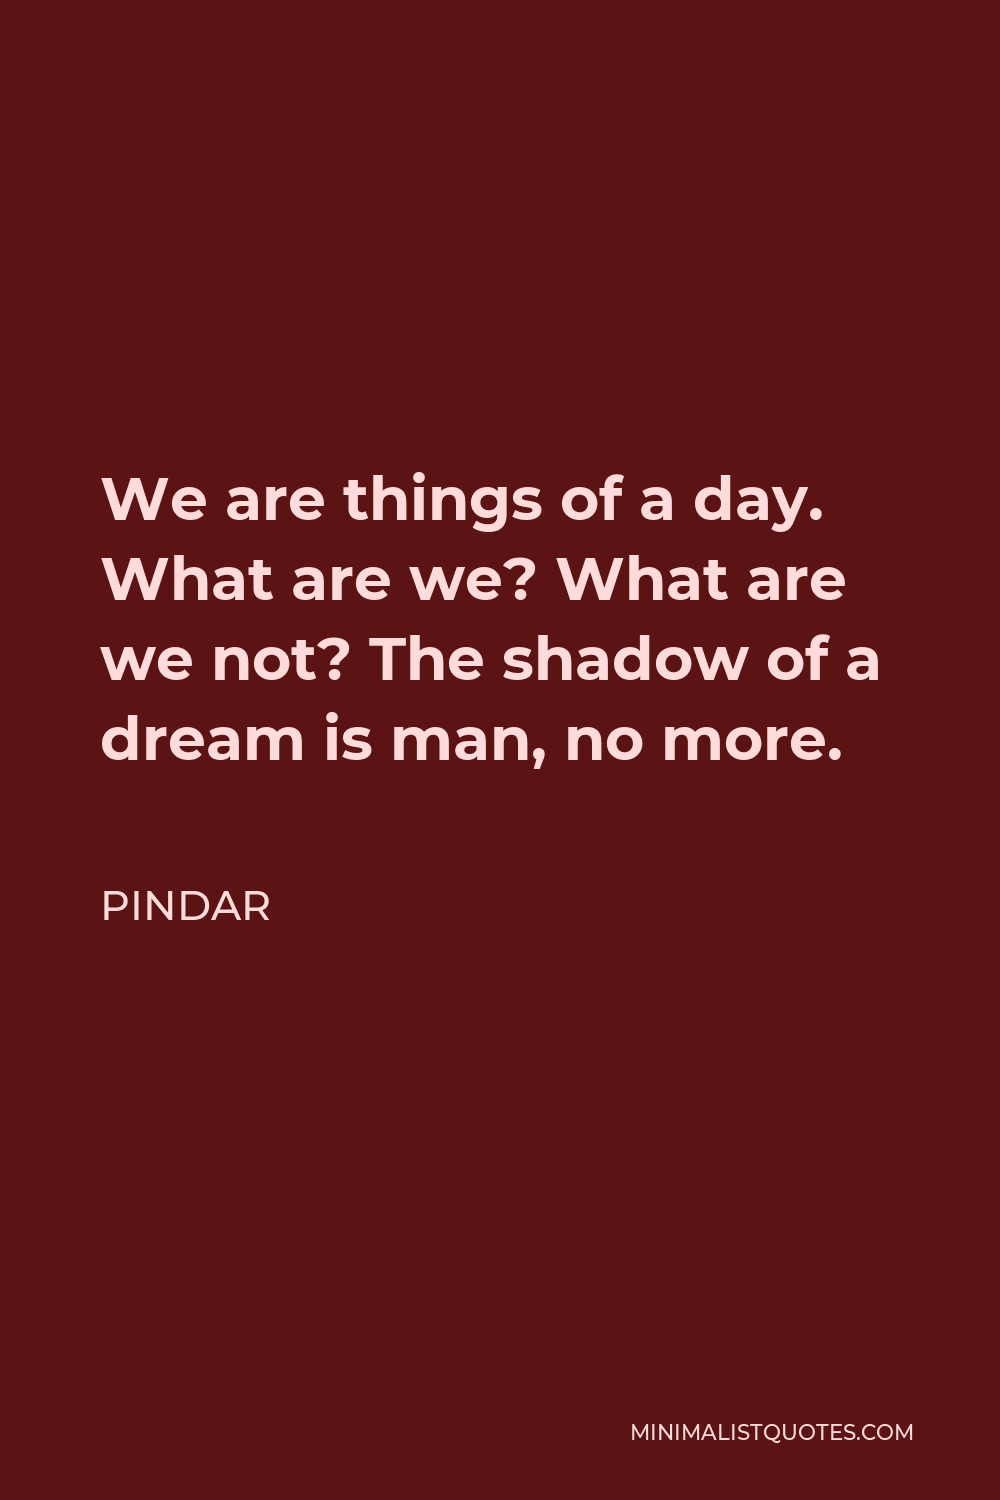 Pindar Quote - We are things of a day. What are we? What are we not? The shadow of a dream is man, no more.